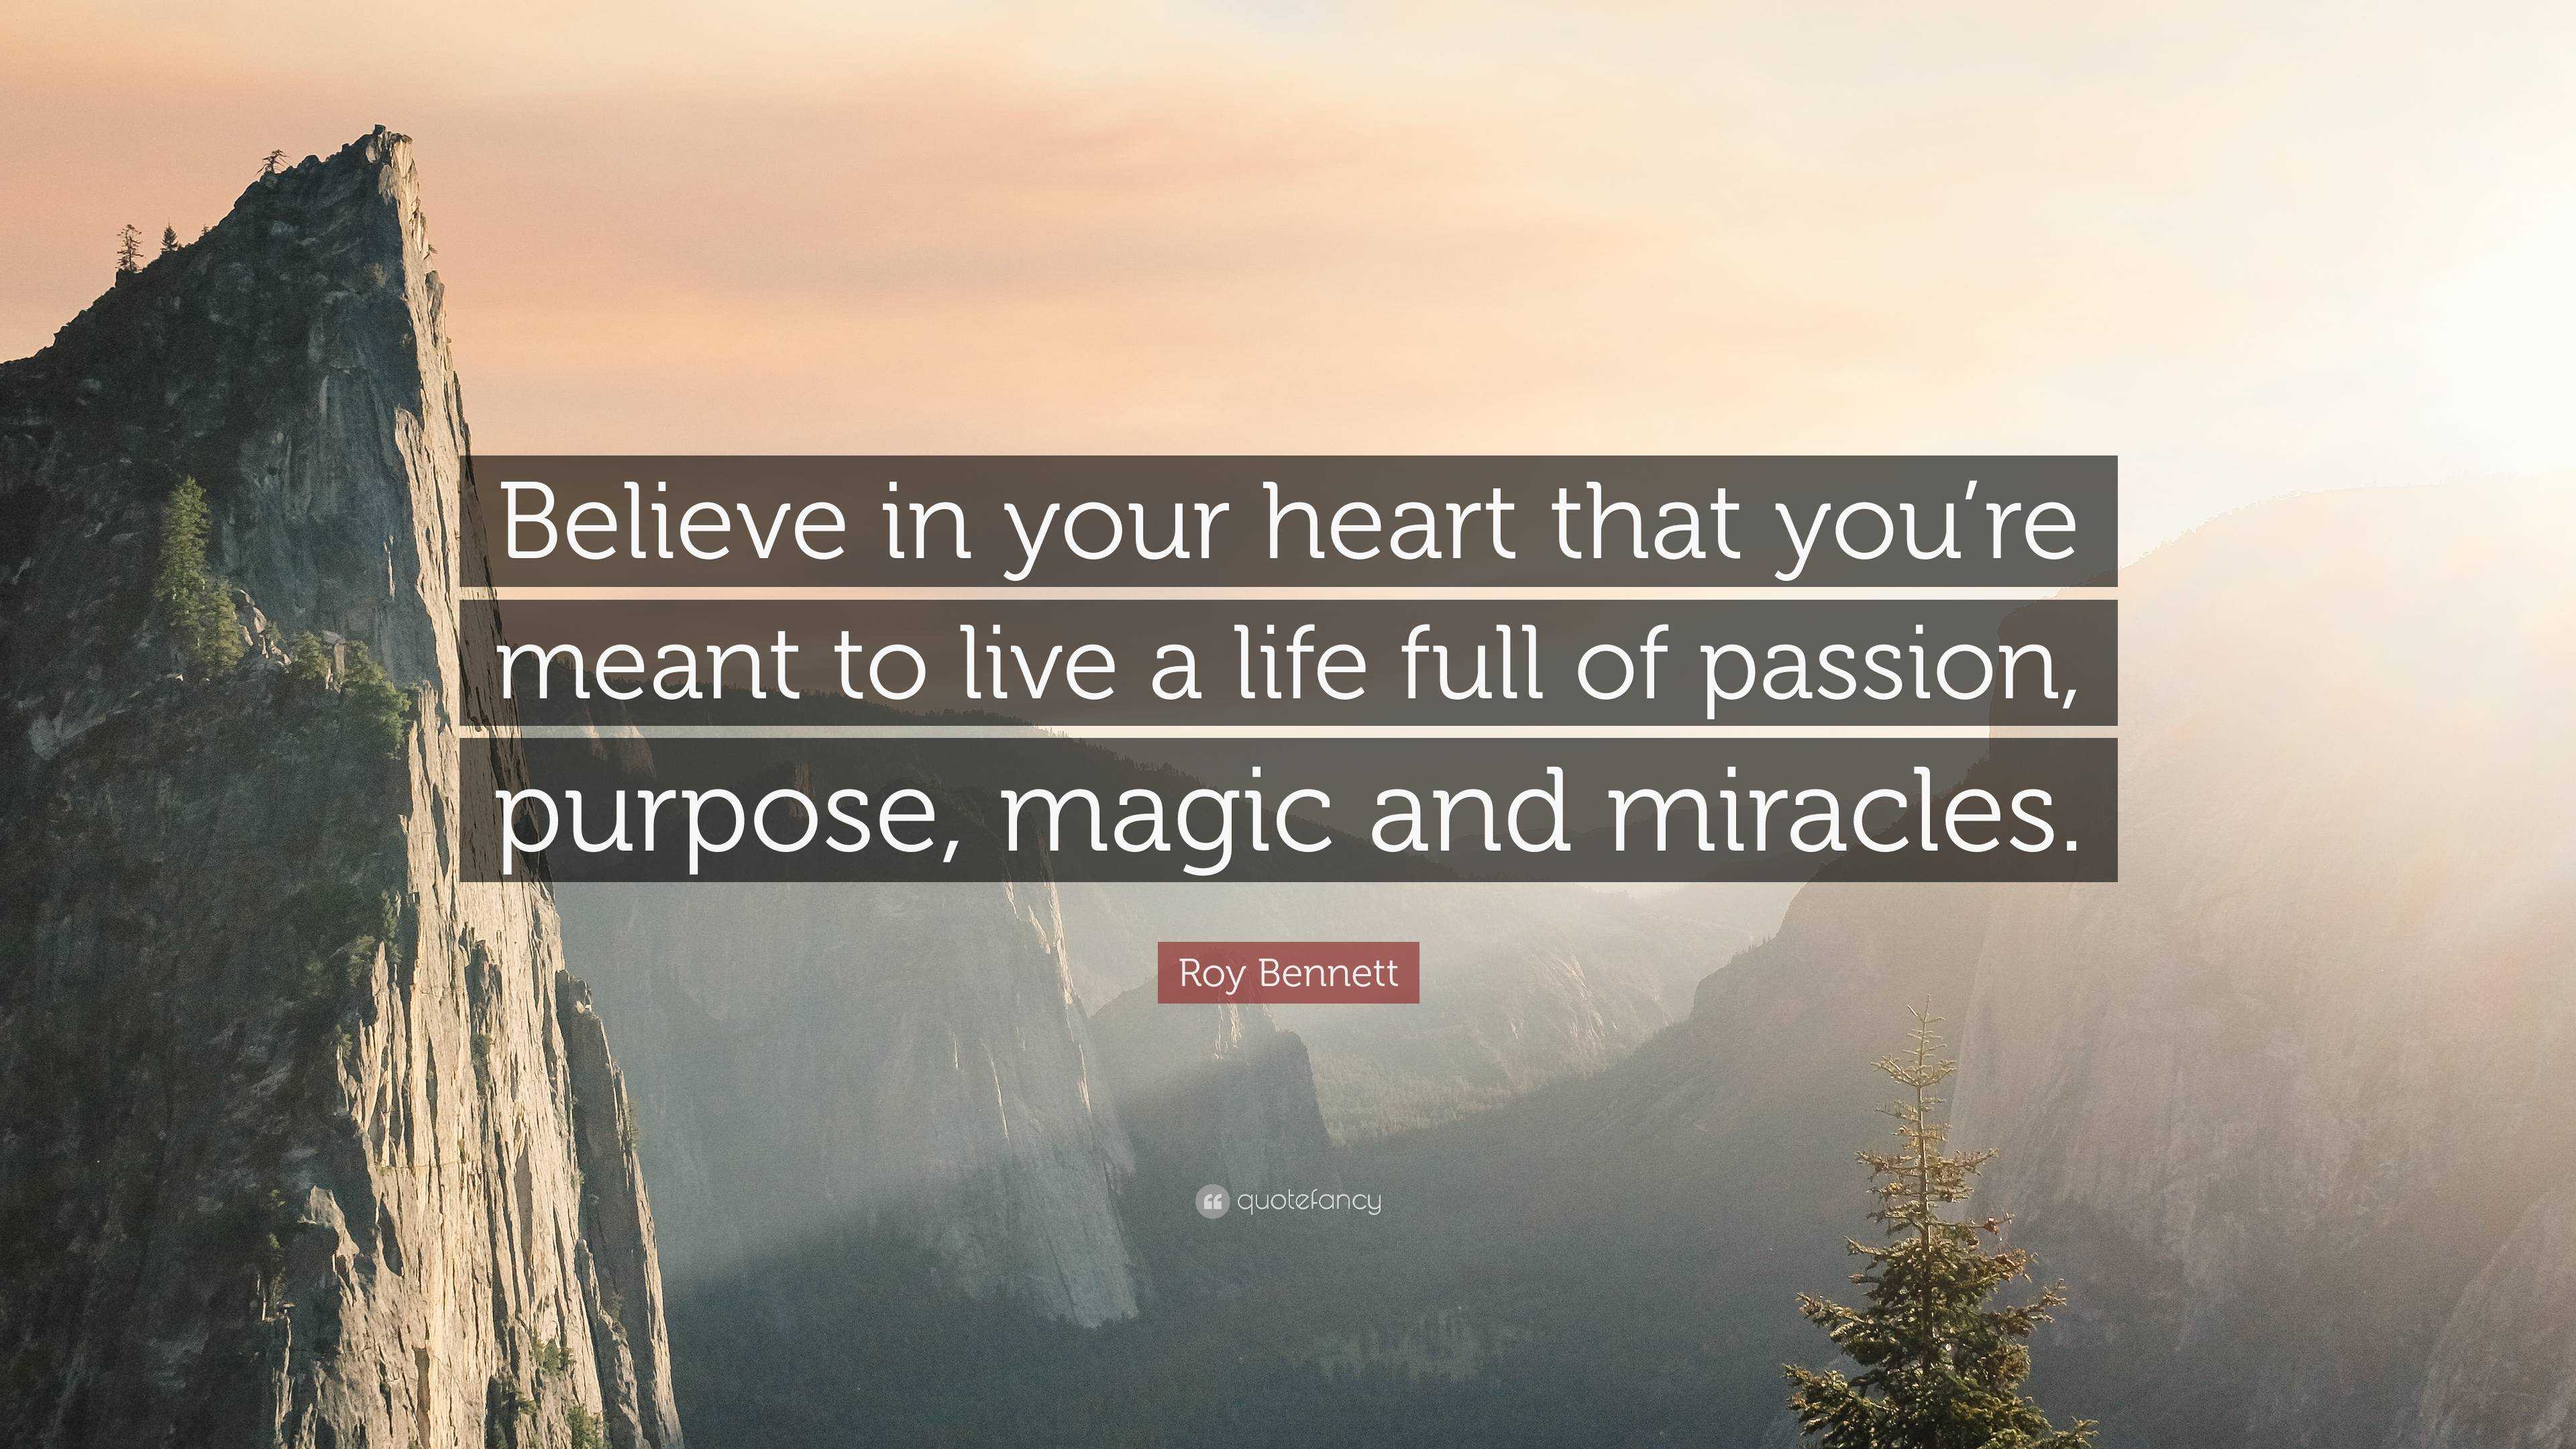 Roy Bennett Quote “believe In Your Heart That Youre Meant To Live A Life Full Of Passion